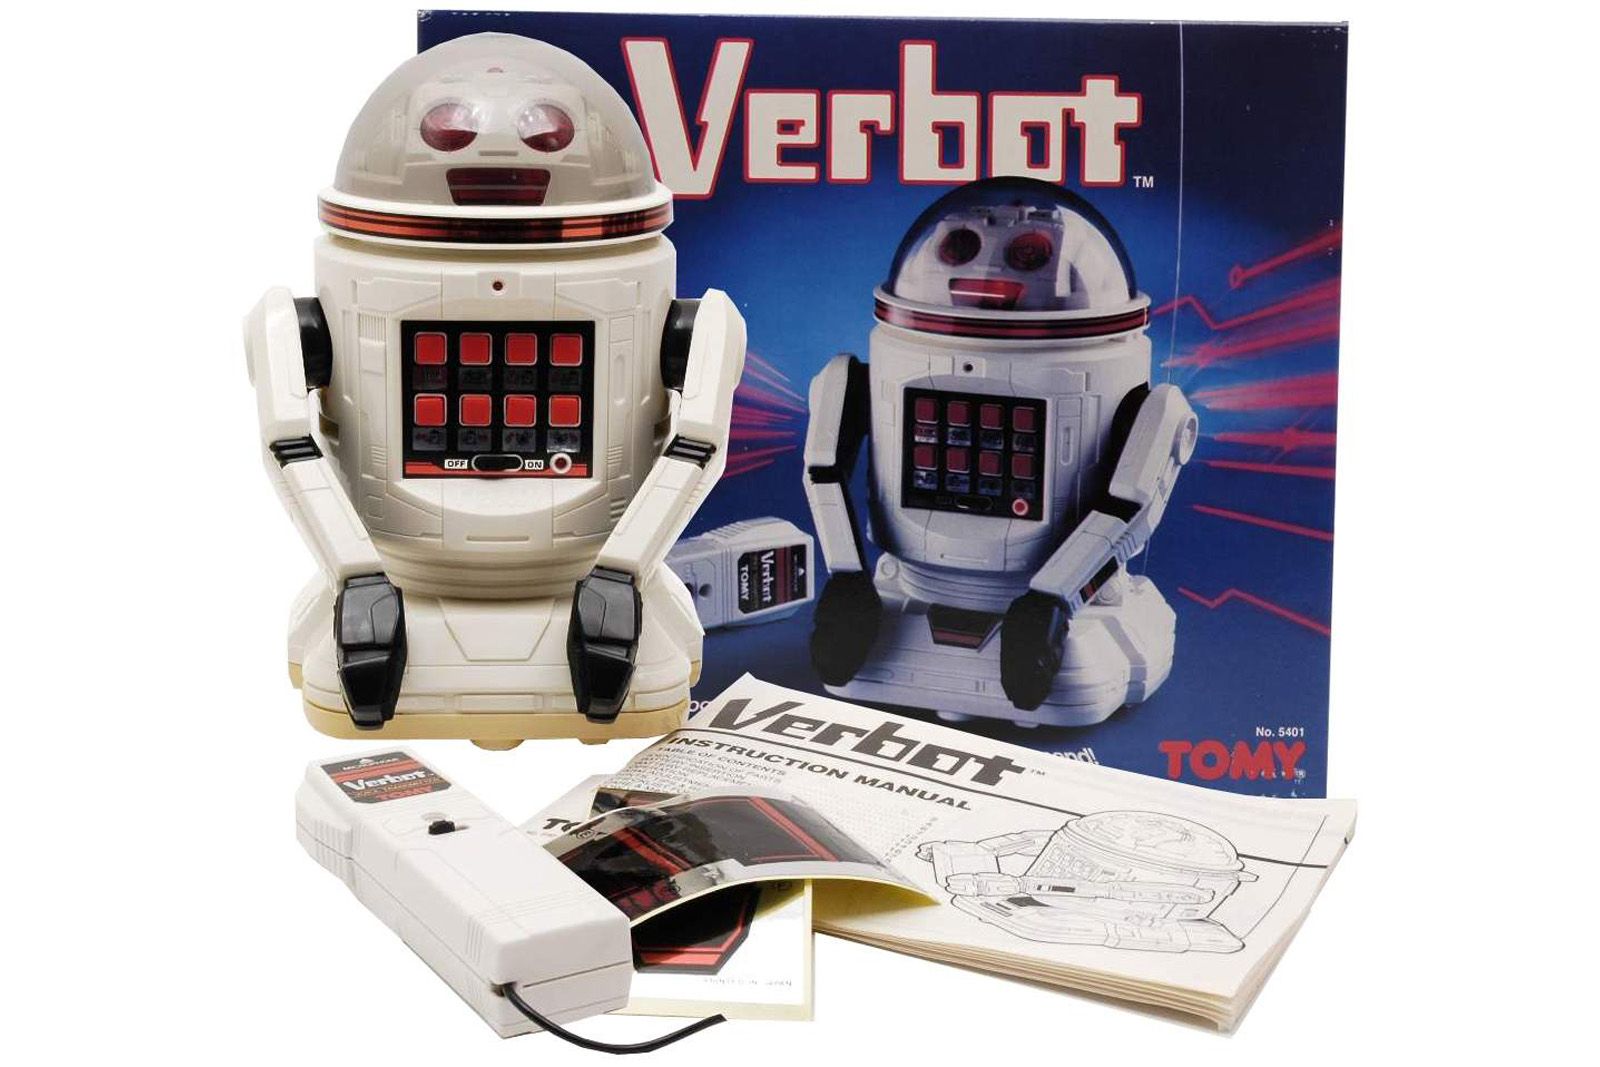 18 of the best and most iconic real world robots from the 1980s image 19